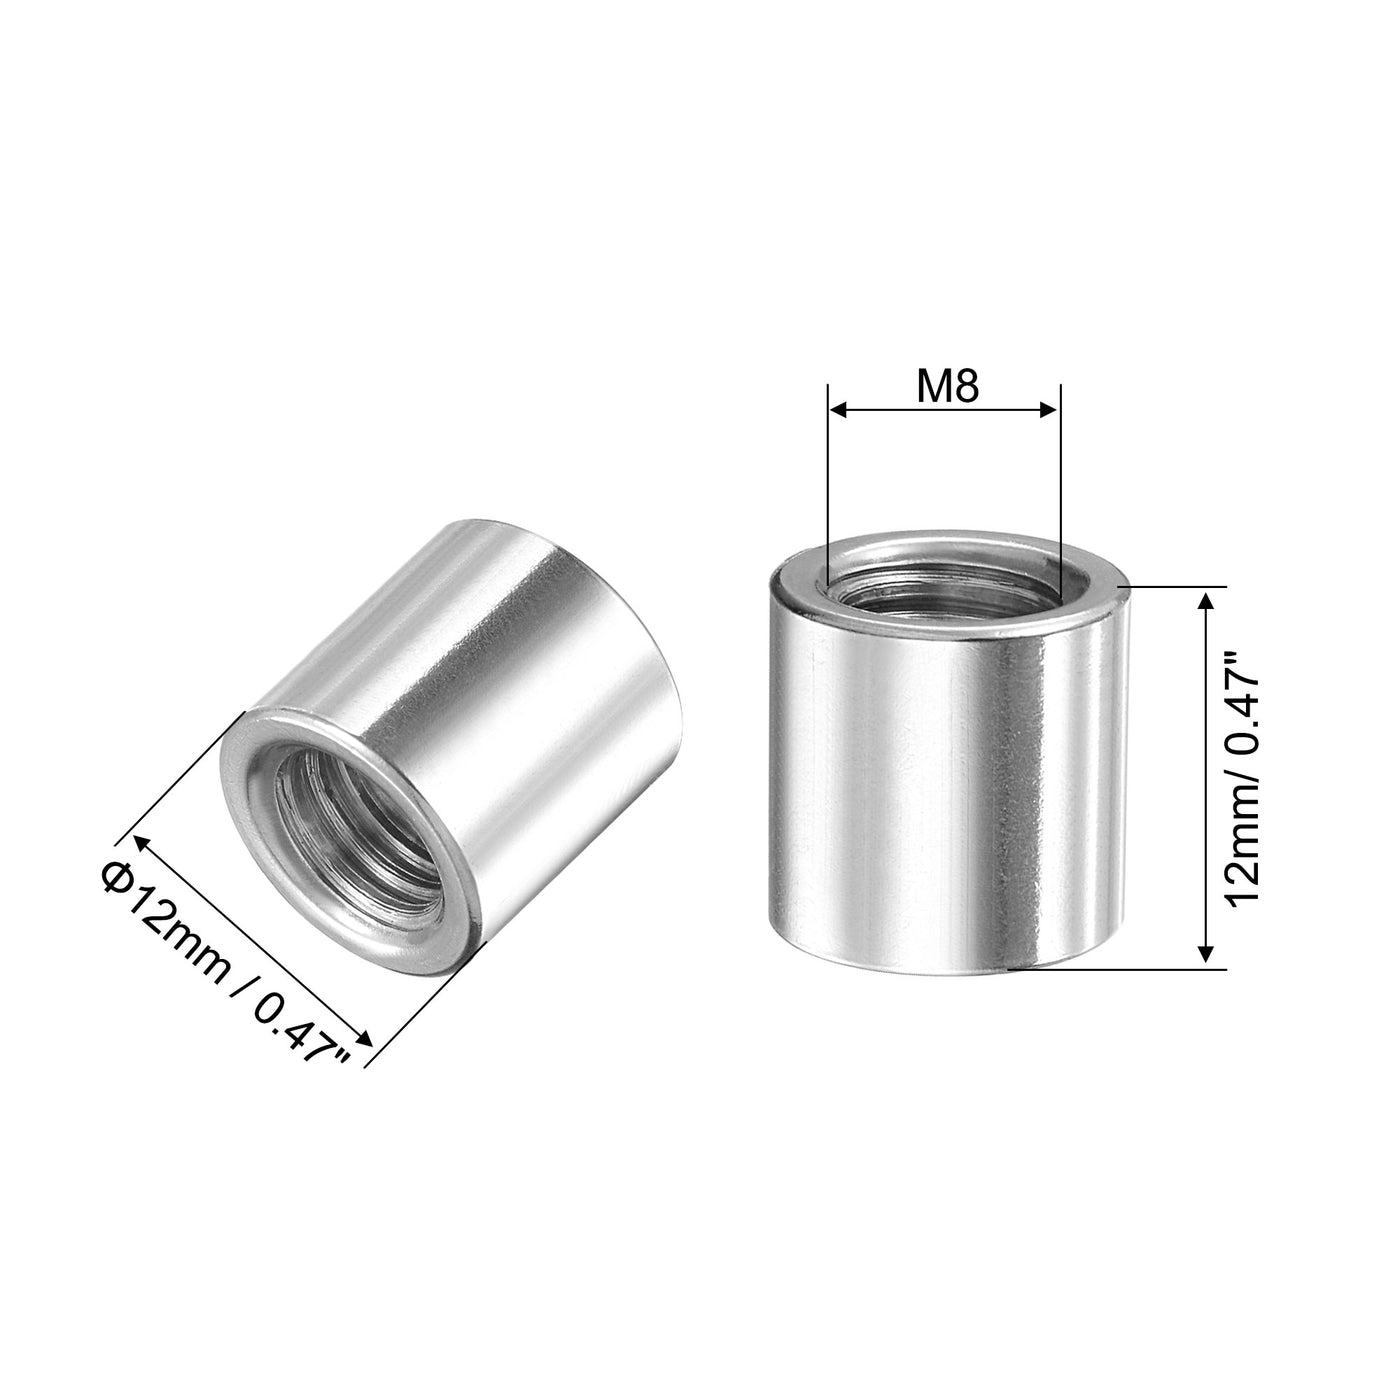 Uxcell Uxcell M10x14mmx13mm Weld On Bung Nut Threaded 201 Stainless Steel Insert Weldable 4pcs